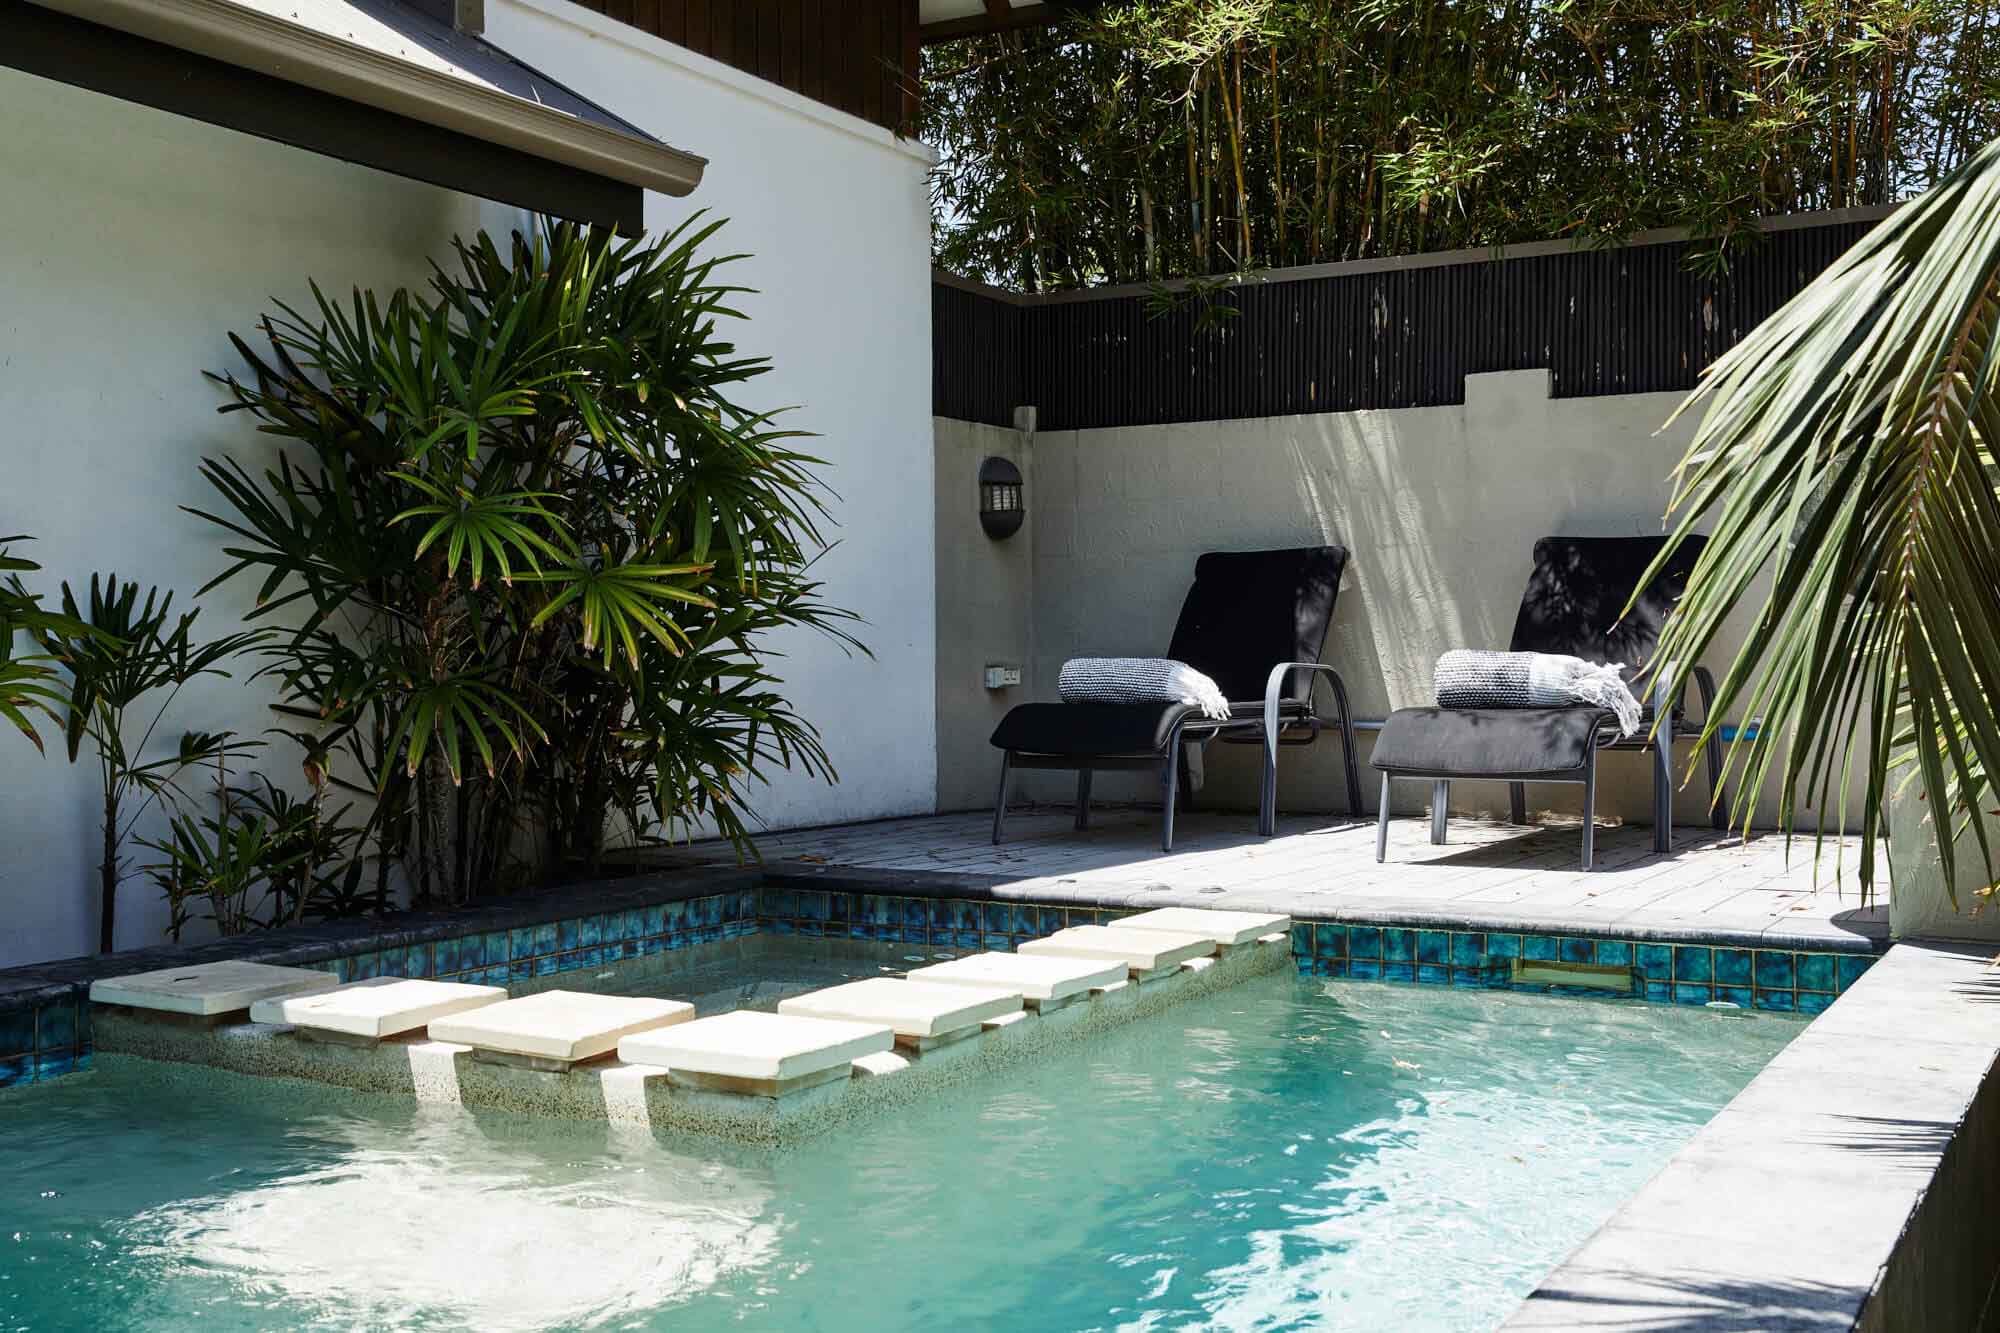 Black daybeds beside the private mineral pool and heated spa at The Villas of Byron